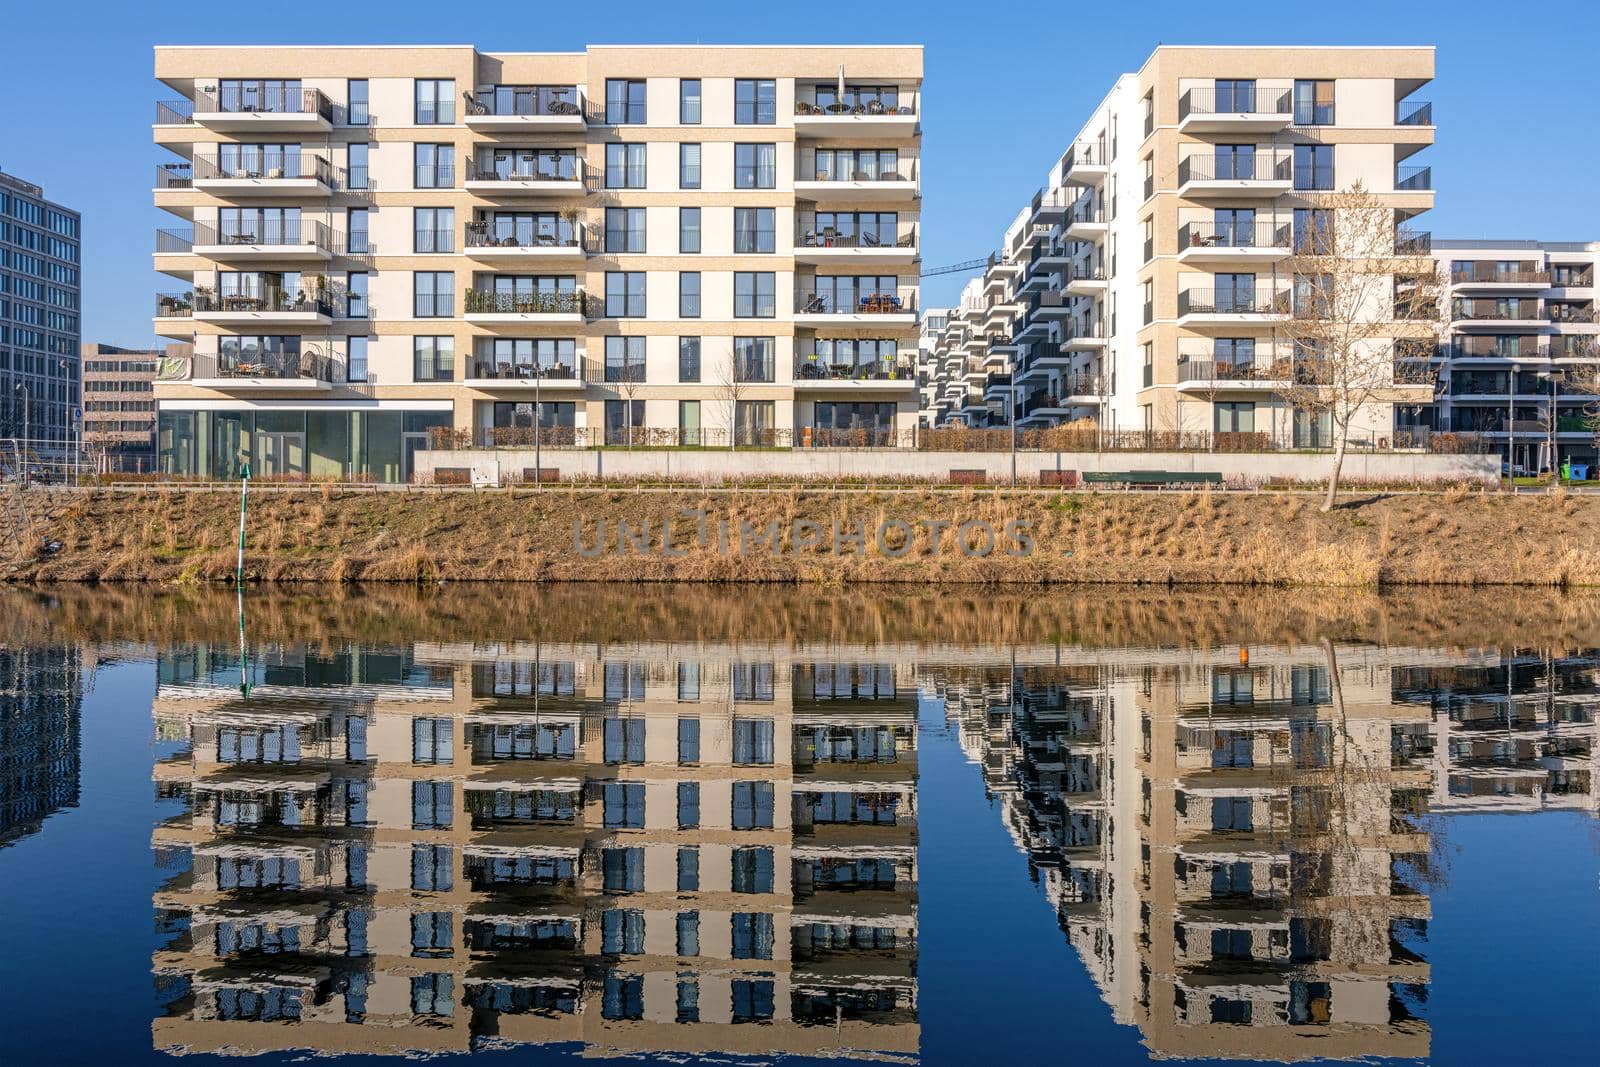 New apartment buildings reflecting in a canal seen by elxeneize